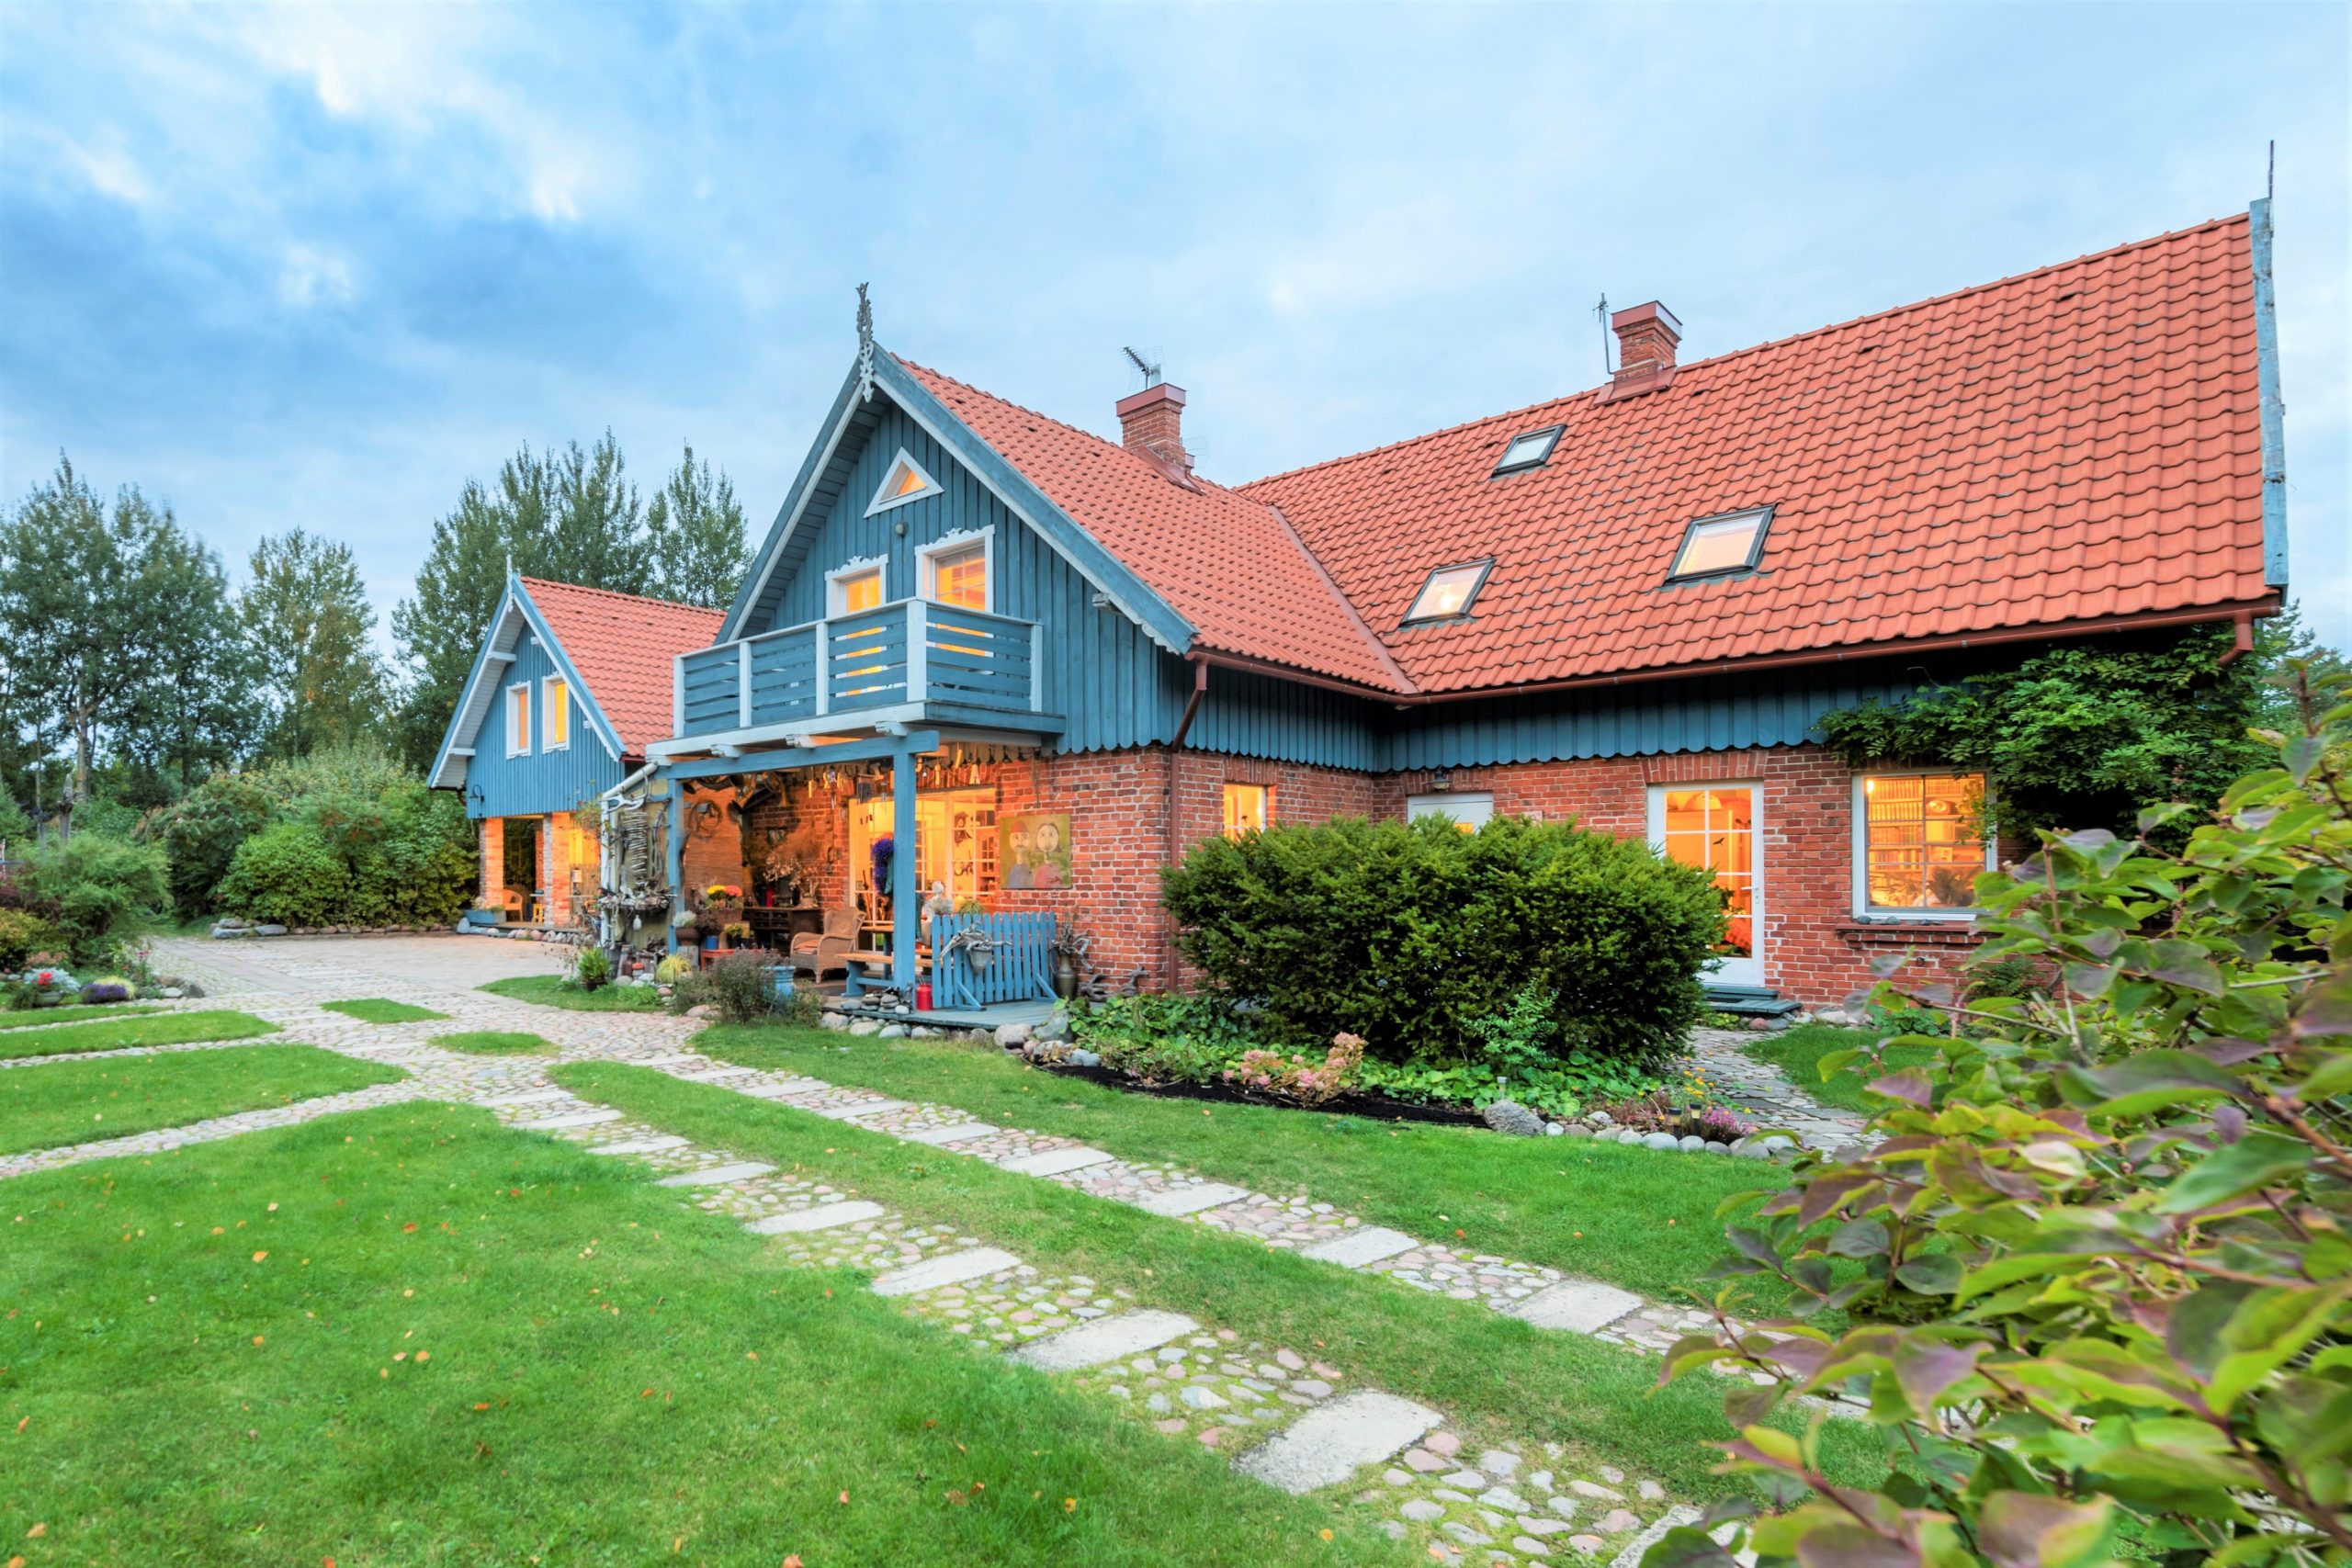 Holiday in Palanga - new house of the guest house